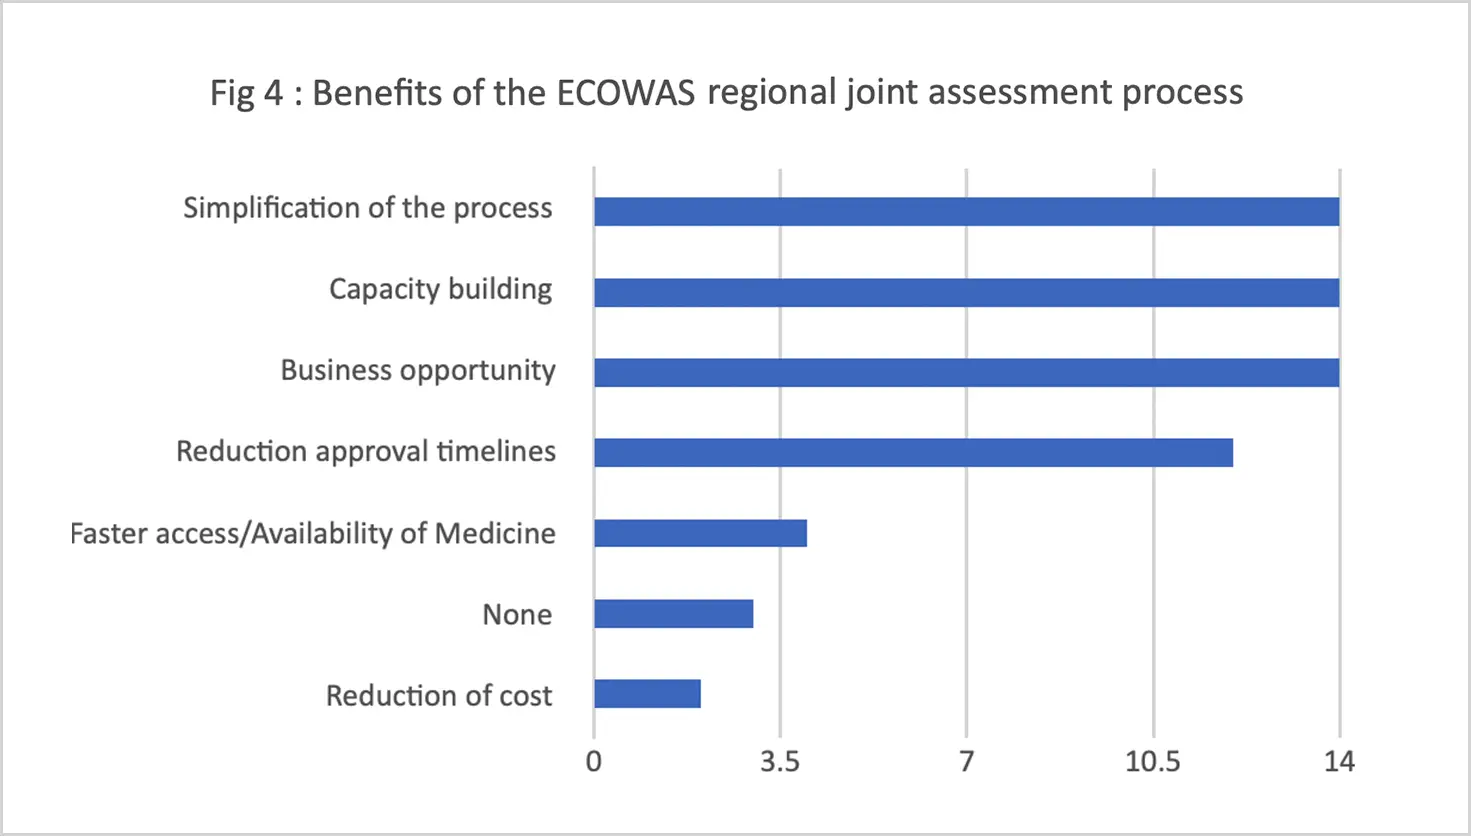 Fig 4: Benefits of the ECOWAS Joint Regional Assessment Process